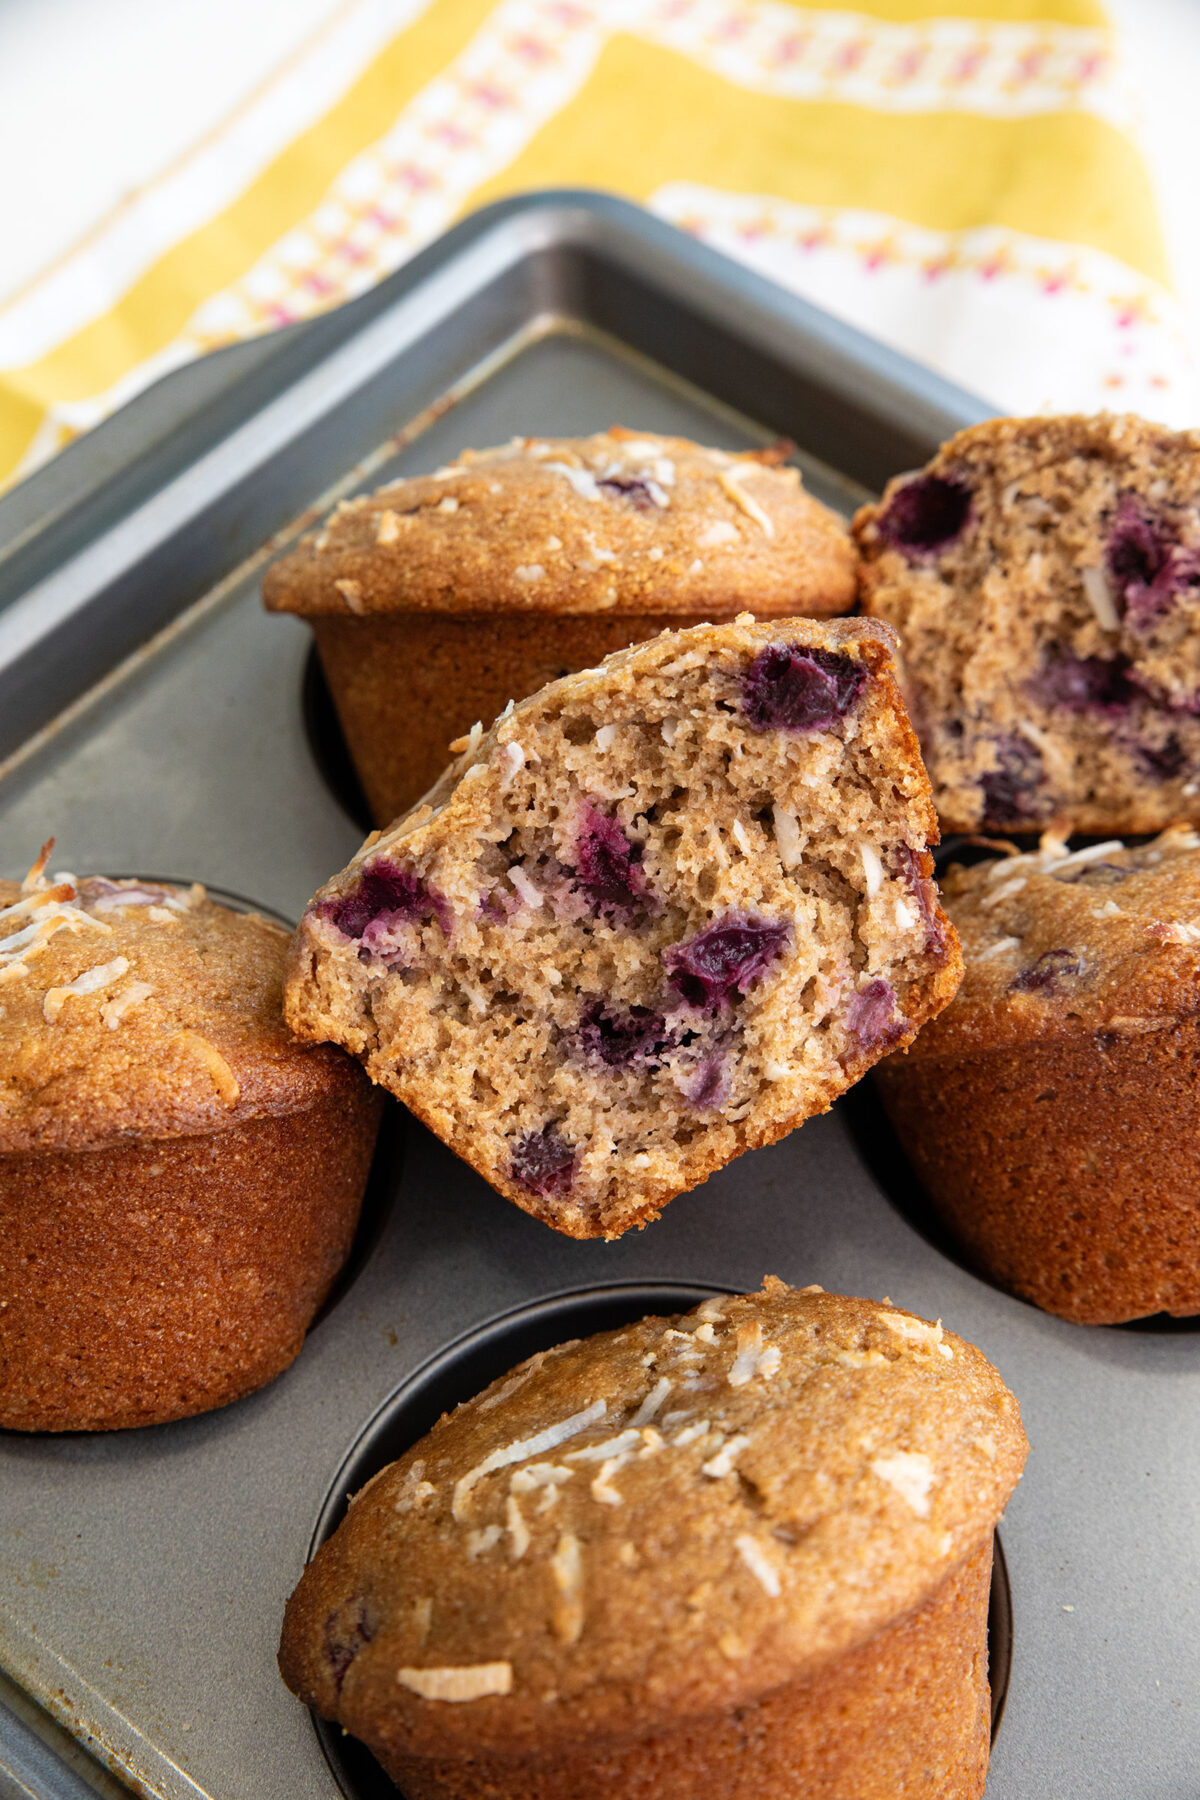 close up of a cherry coconut whole wheat muffin cut in half showing cherries inside.